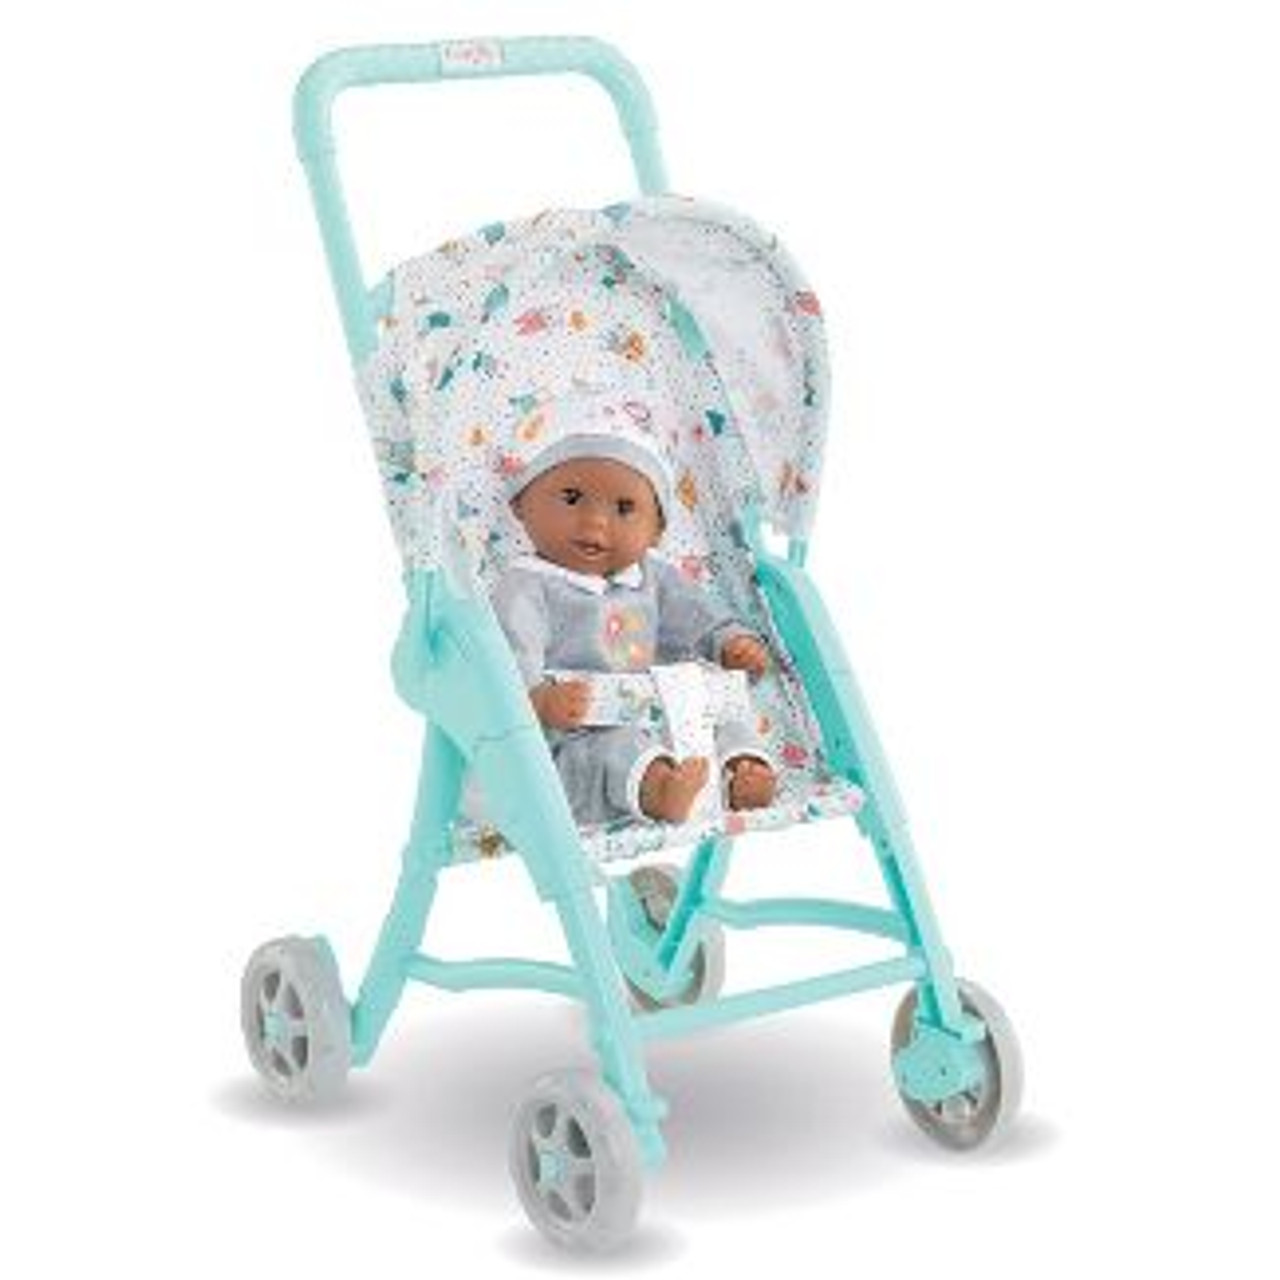 BABY STROLLER 12 INCHES